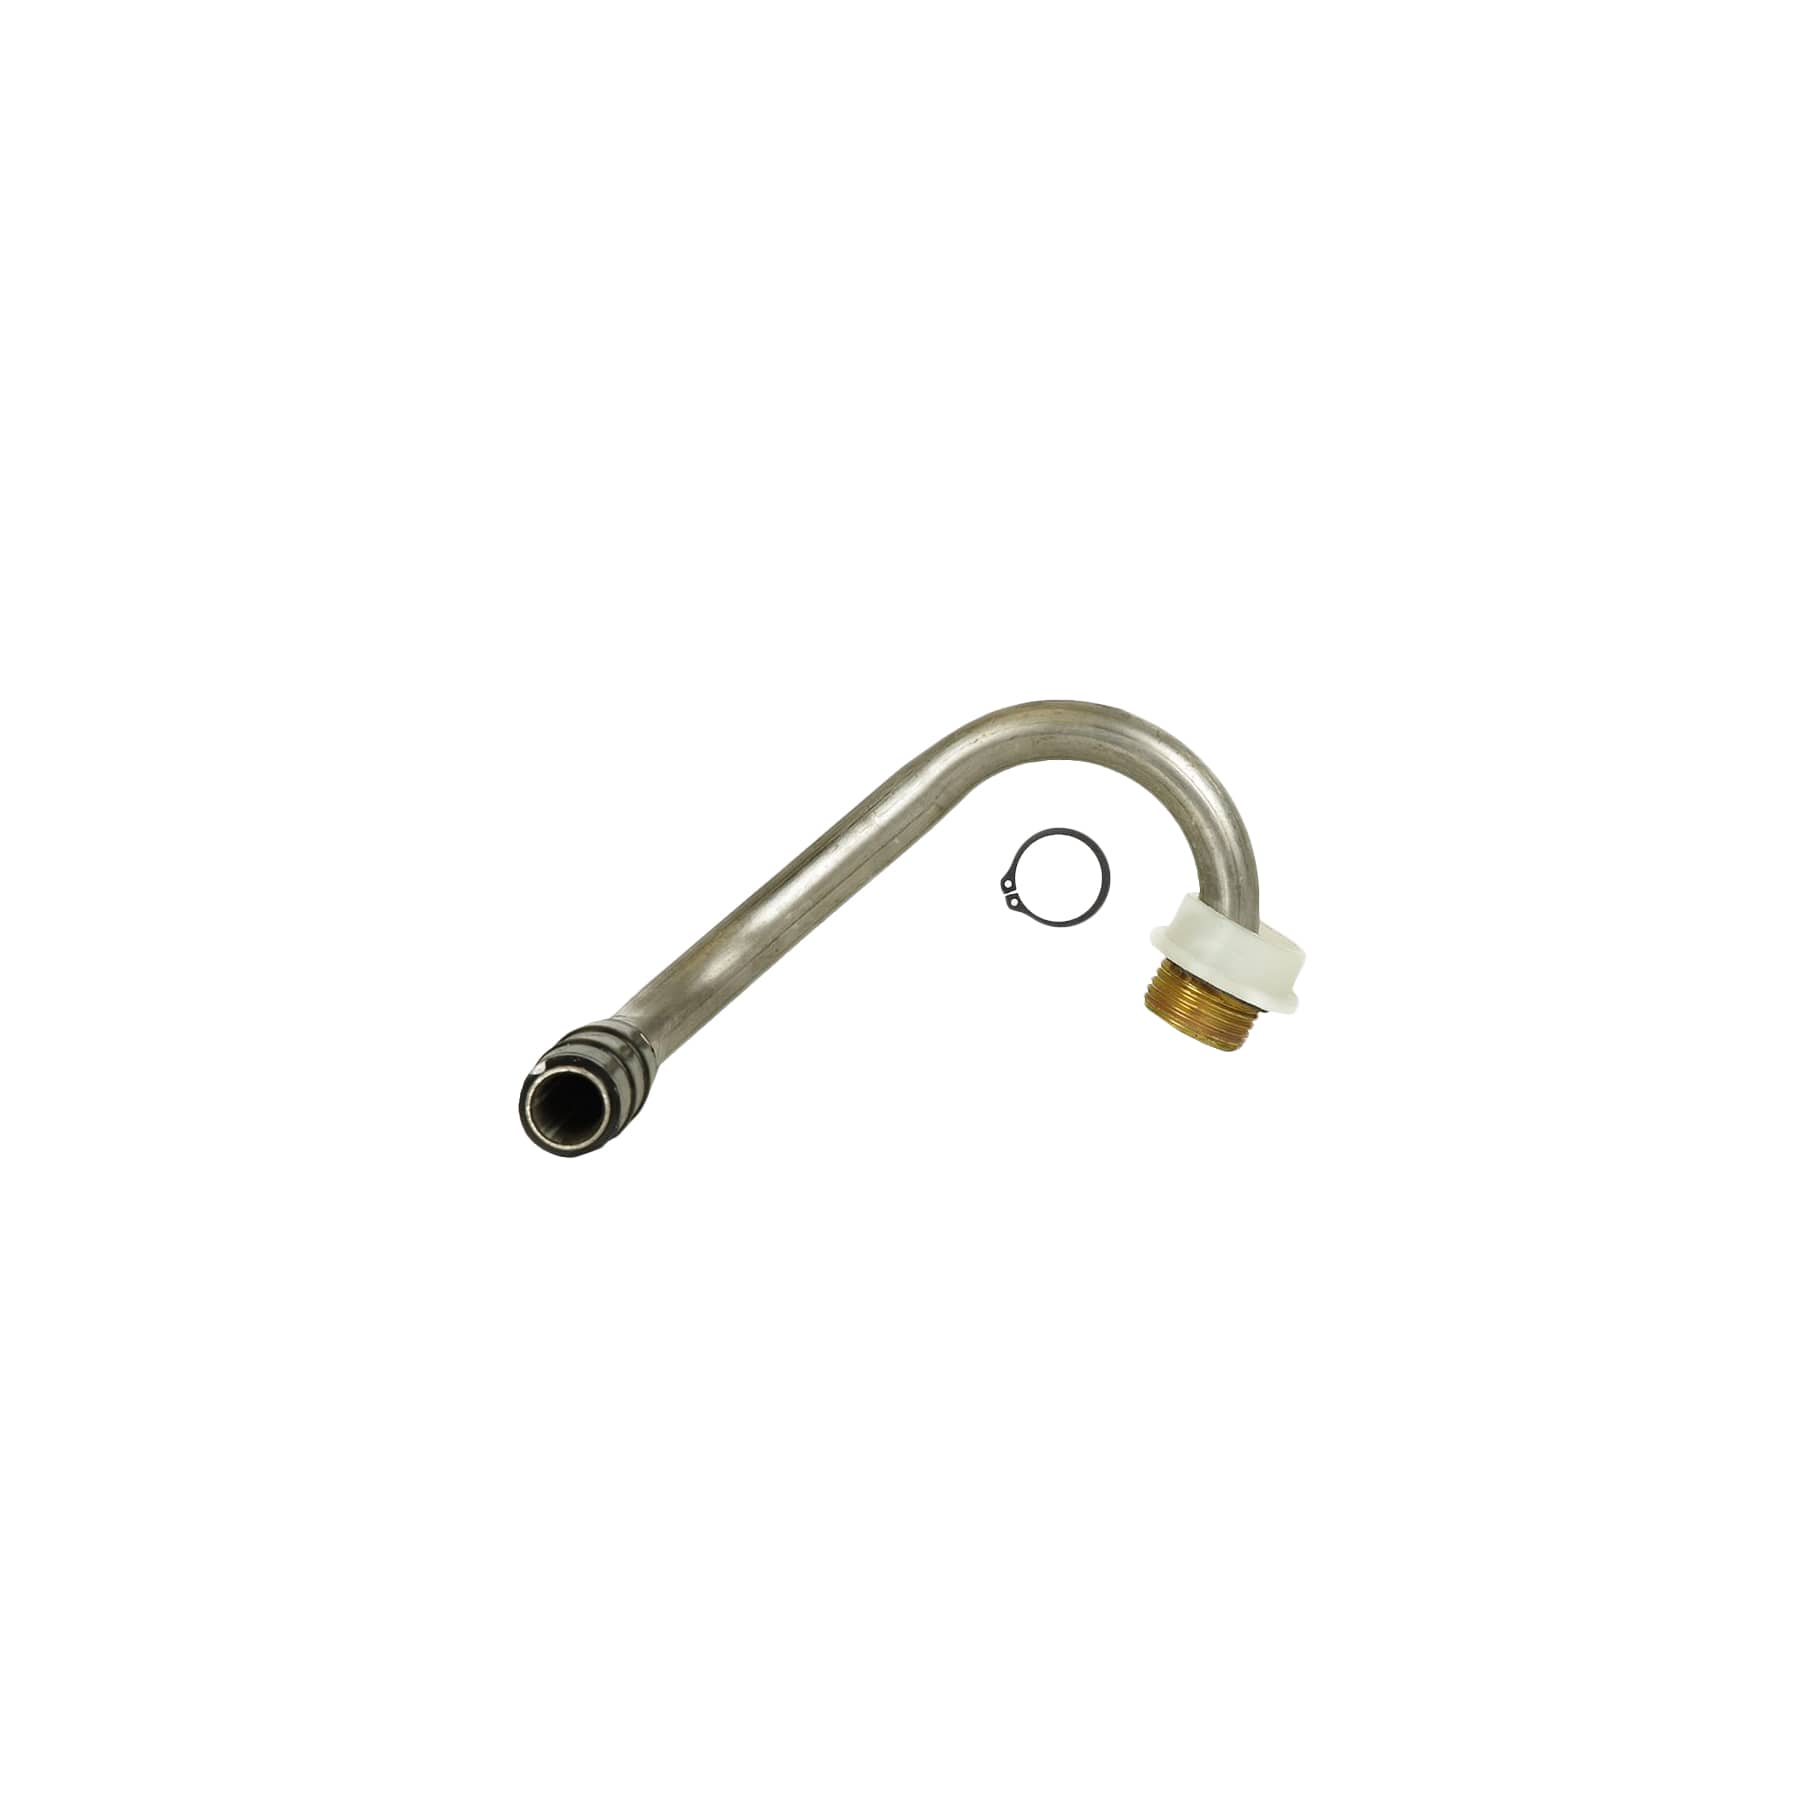 Garden Hose Adapter, Brass Replacement Part Swivel, Hose Reel Parts Fittings